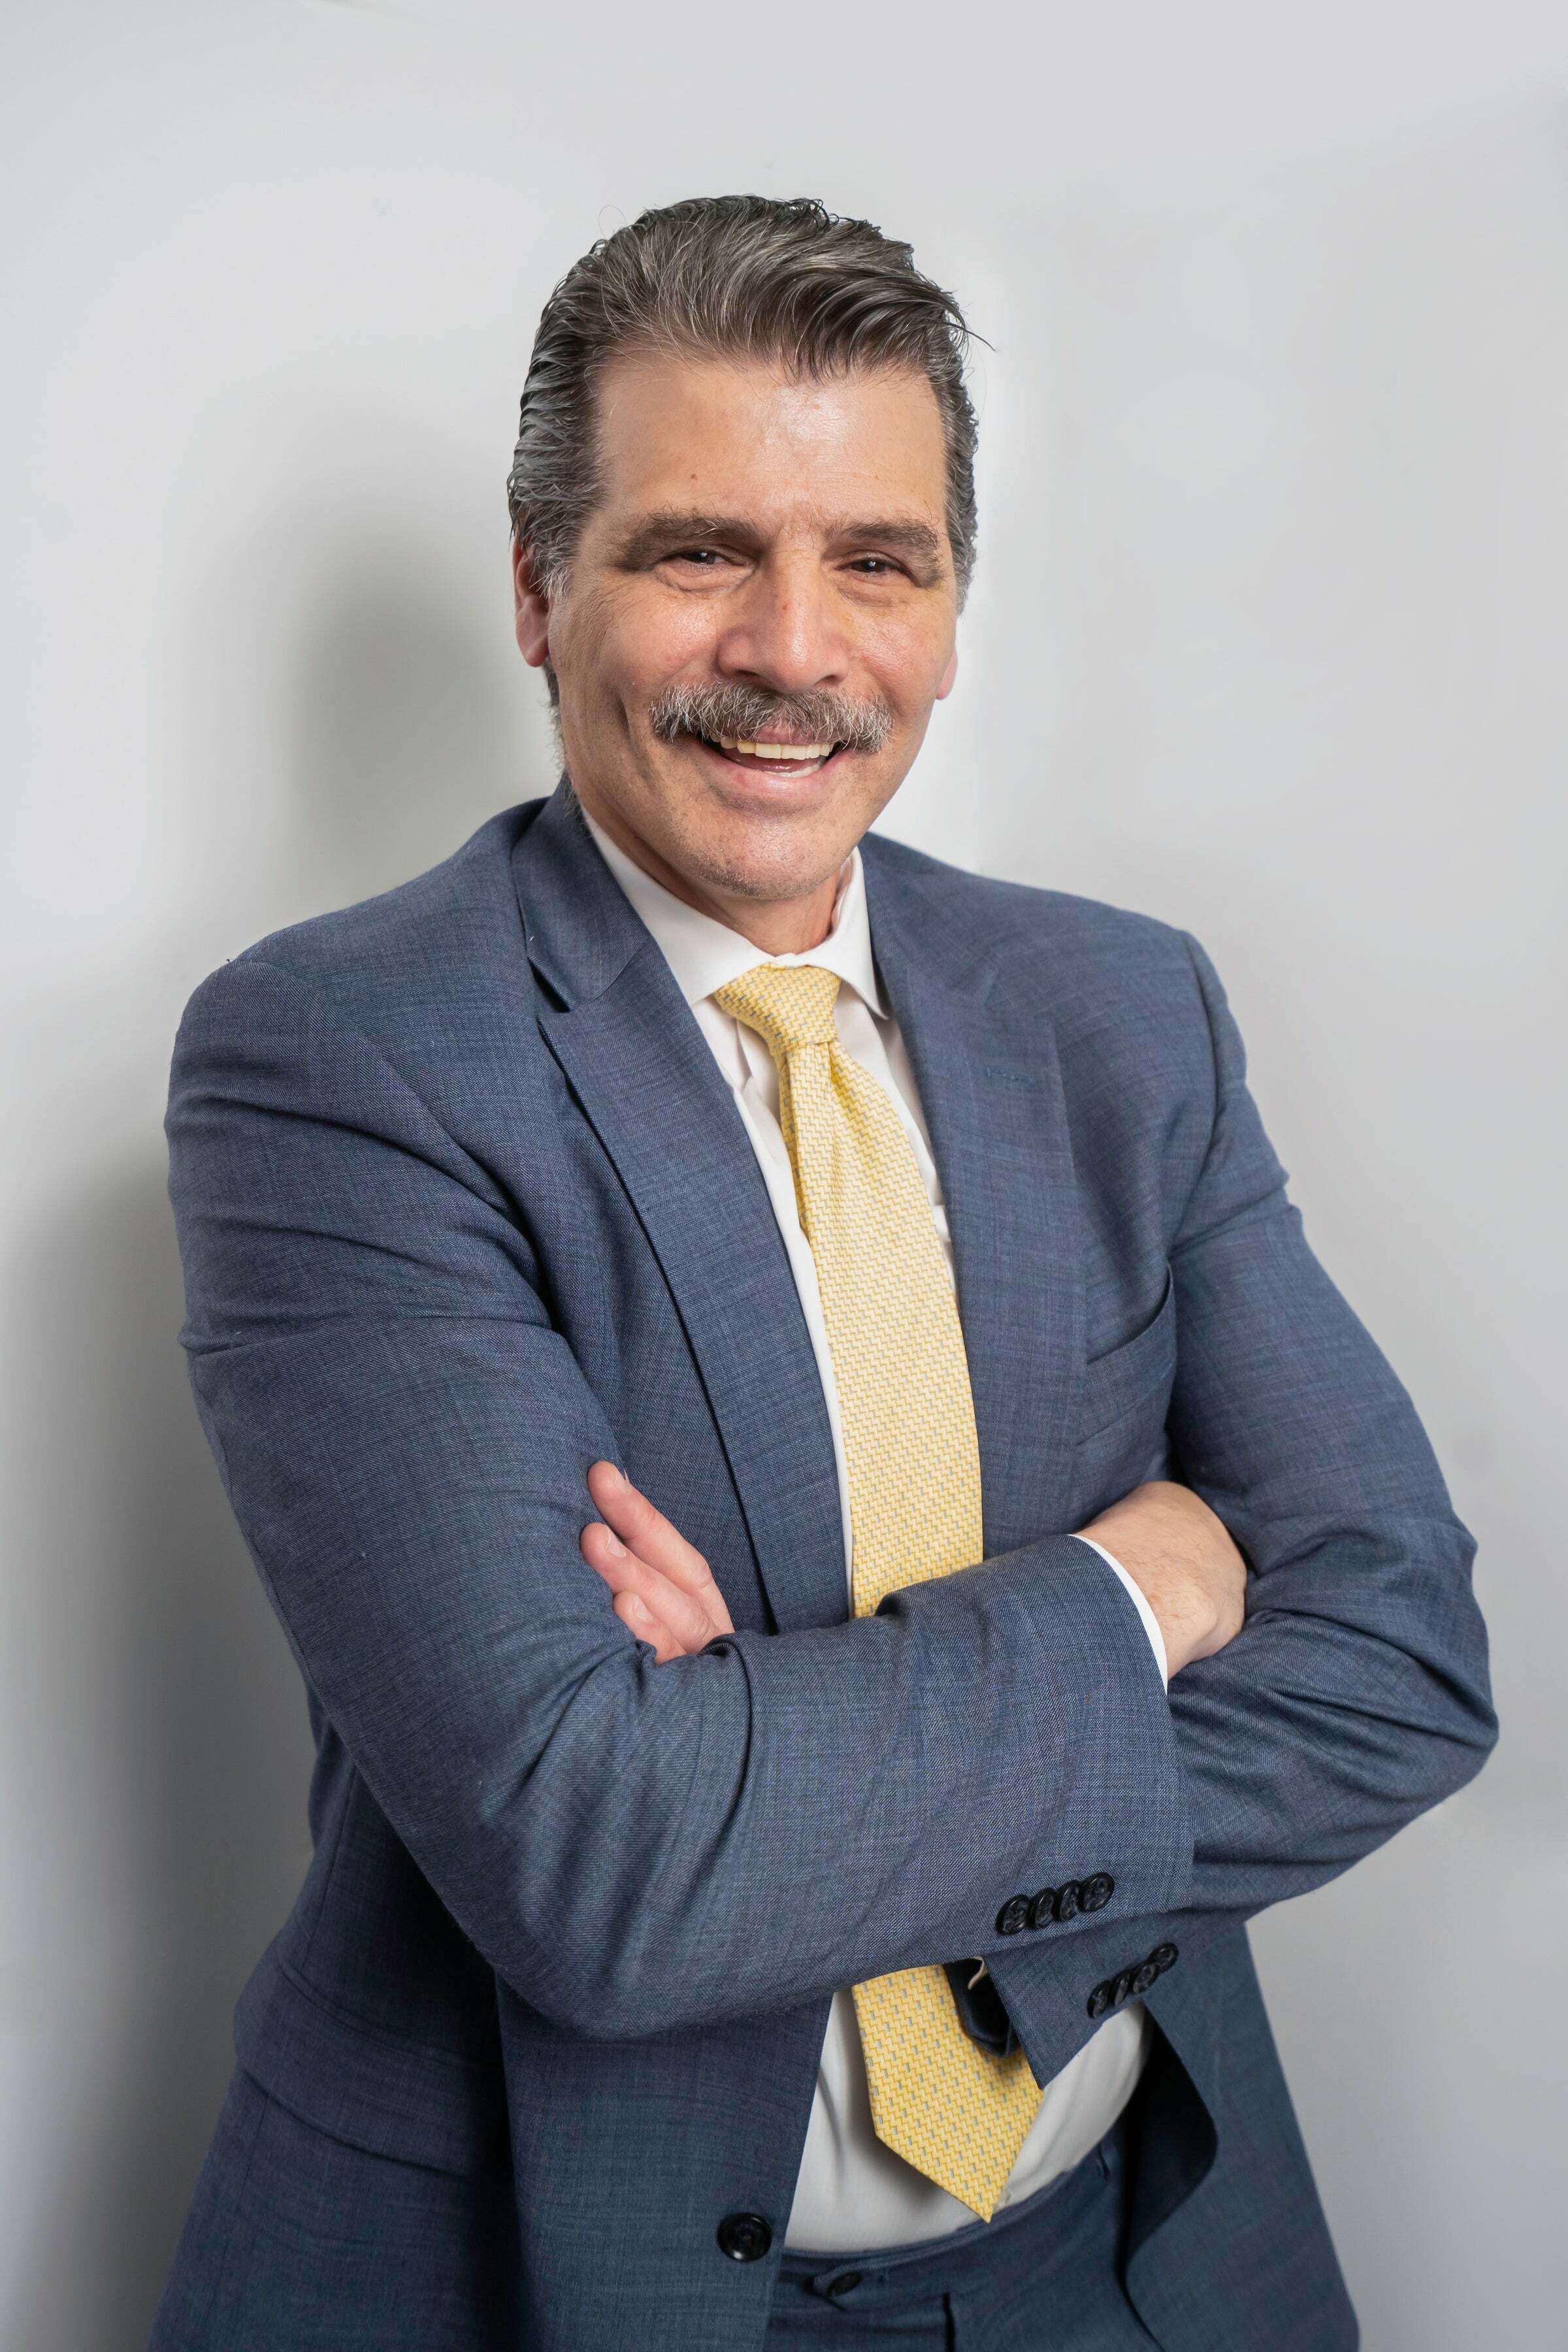 Michael D'Onofrio, Real Estate Salesperson in White Plains, ERA Insite Realty Services